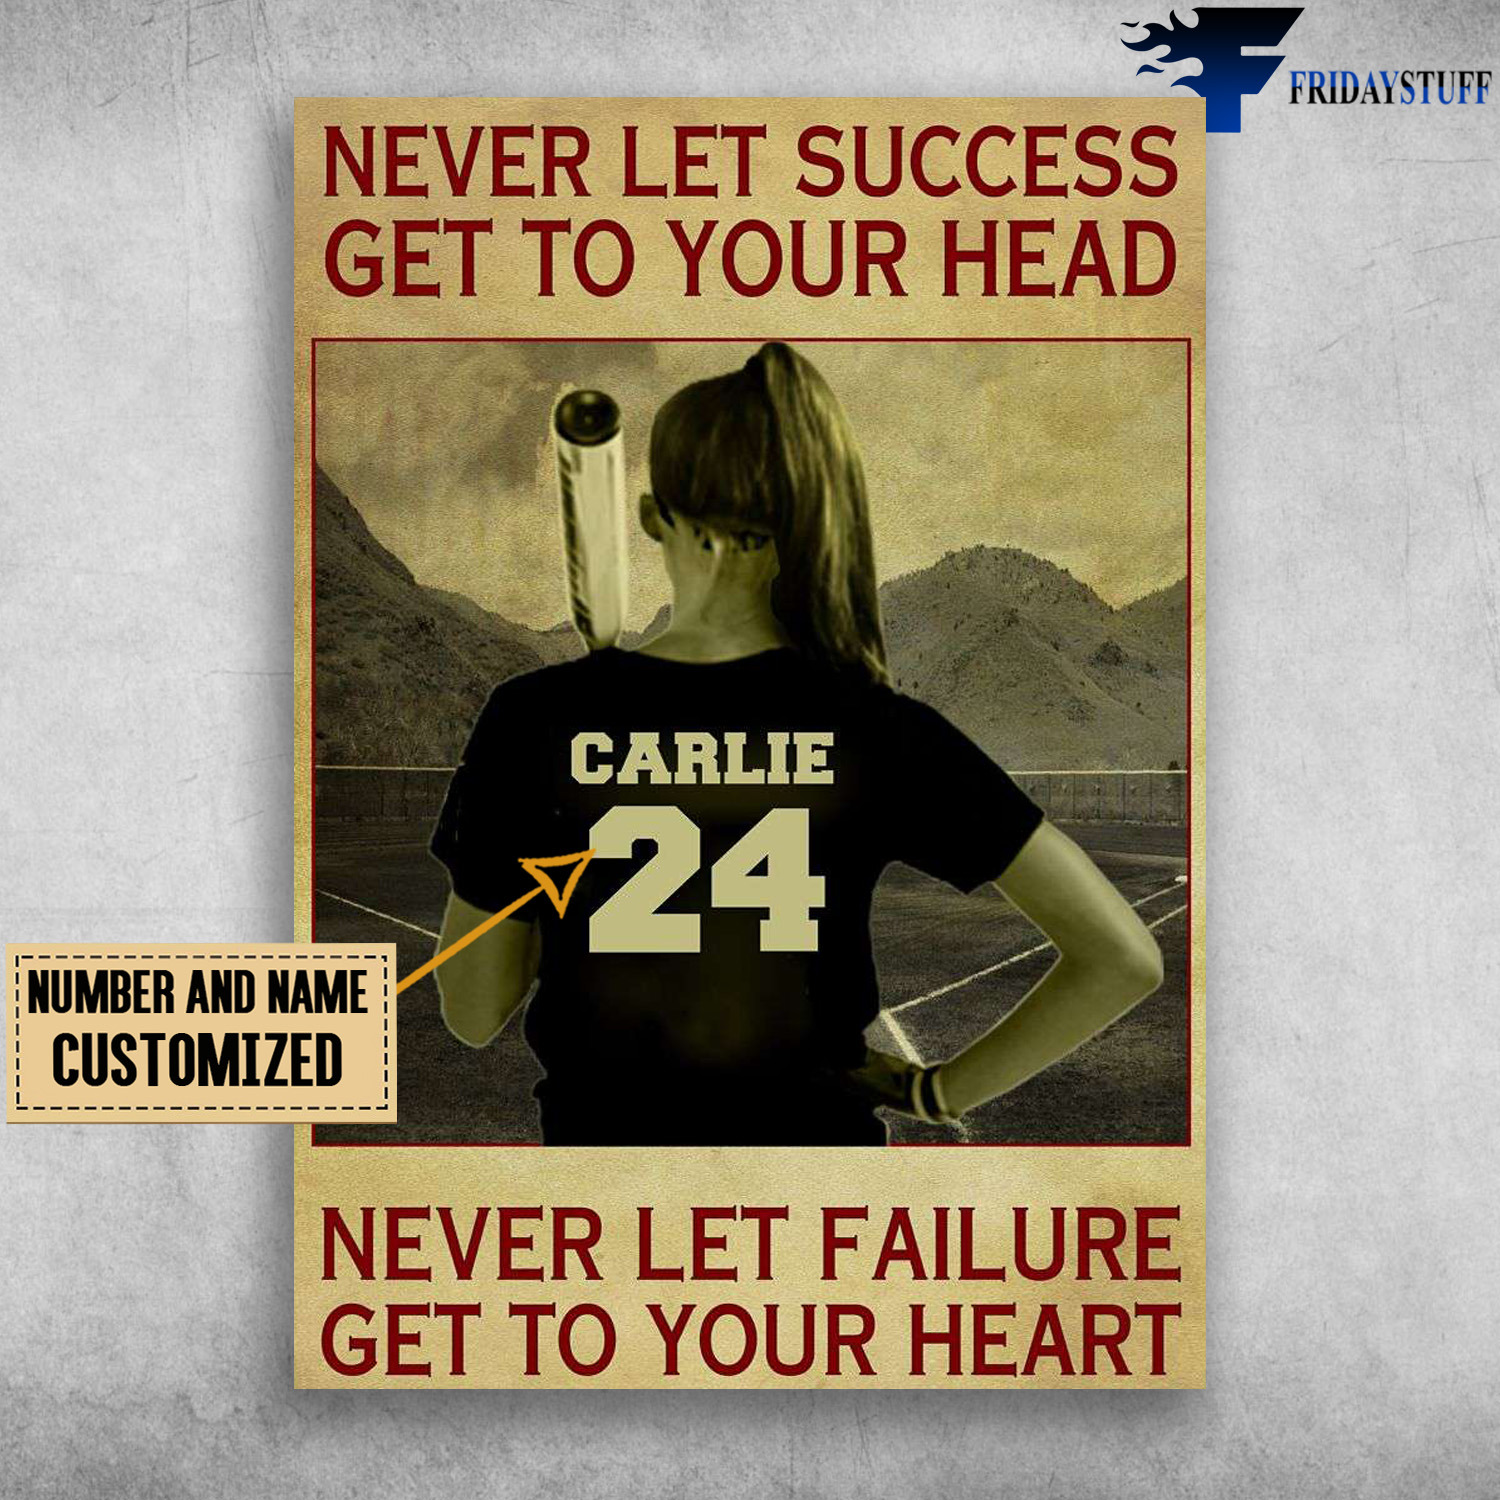 Baseball Girl, Never Let Succec, Get To Your Head, Never Let Failure, Get To Your Heart